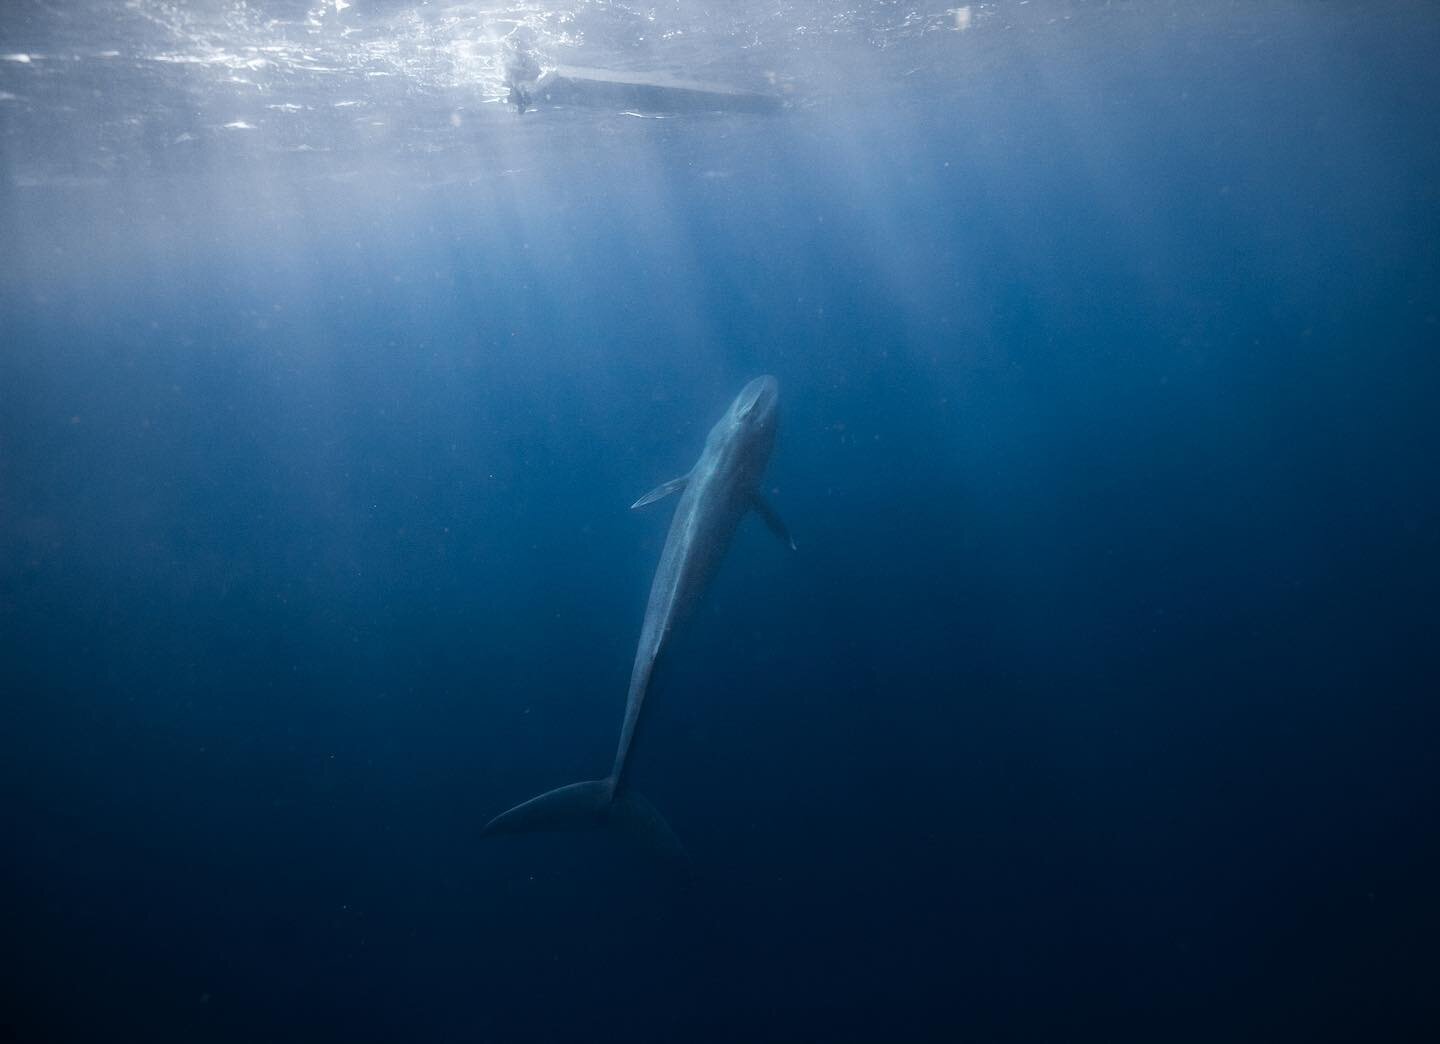 Sharing the water with a blue whale reminded me of words from one of my favorite books. In &ldquo;A Field Guide to Getting Lost,&rdquo; Rebecca Solnit paints an image of a blue world, juxtaposing the blue of distances in landscapes with the blue of l